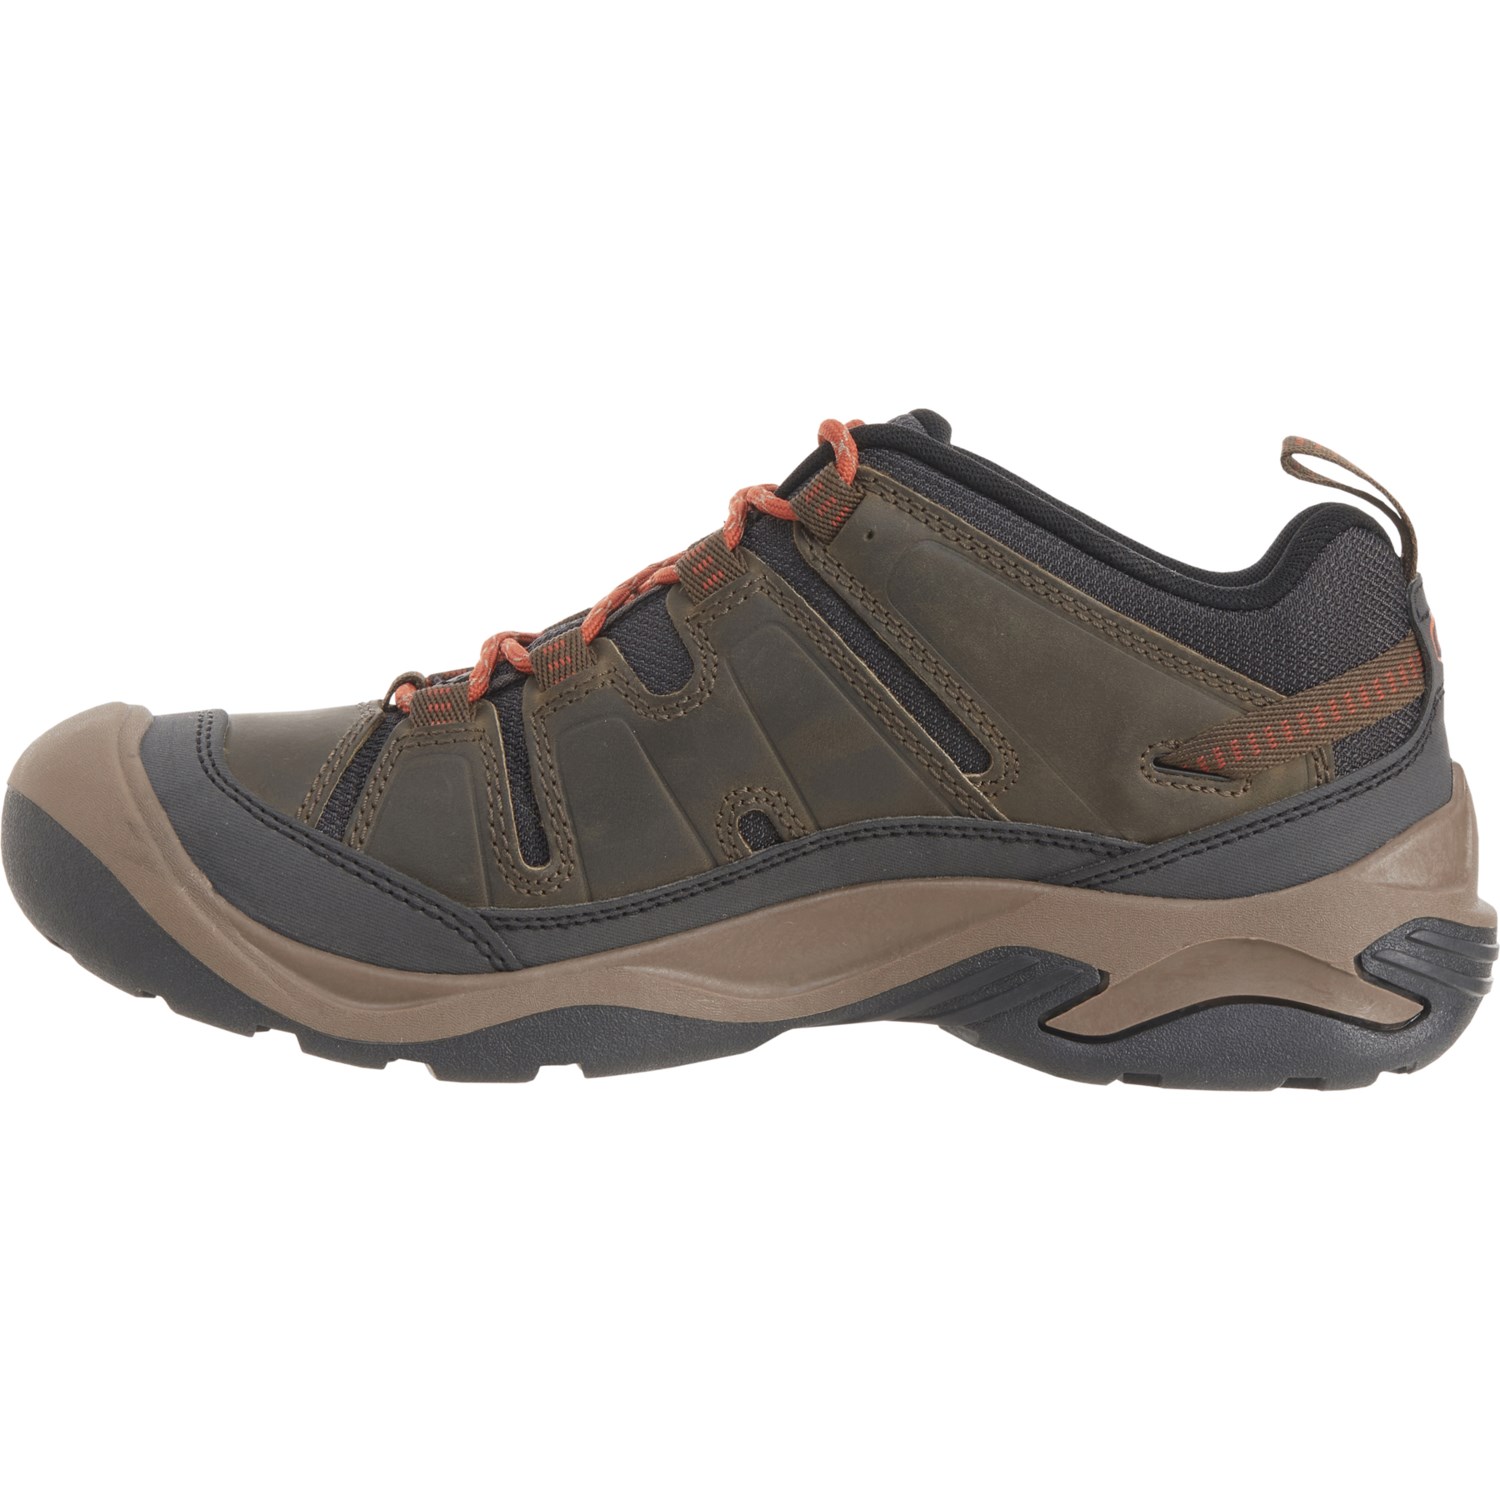 Keen Circadia Hiking Shoes (For Men) - Save 40%